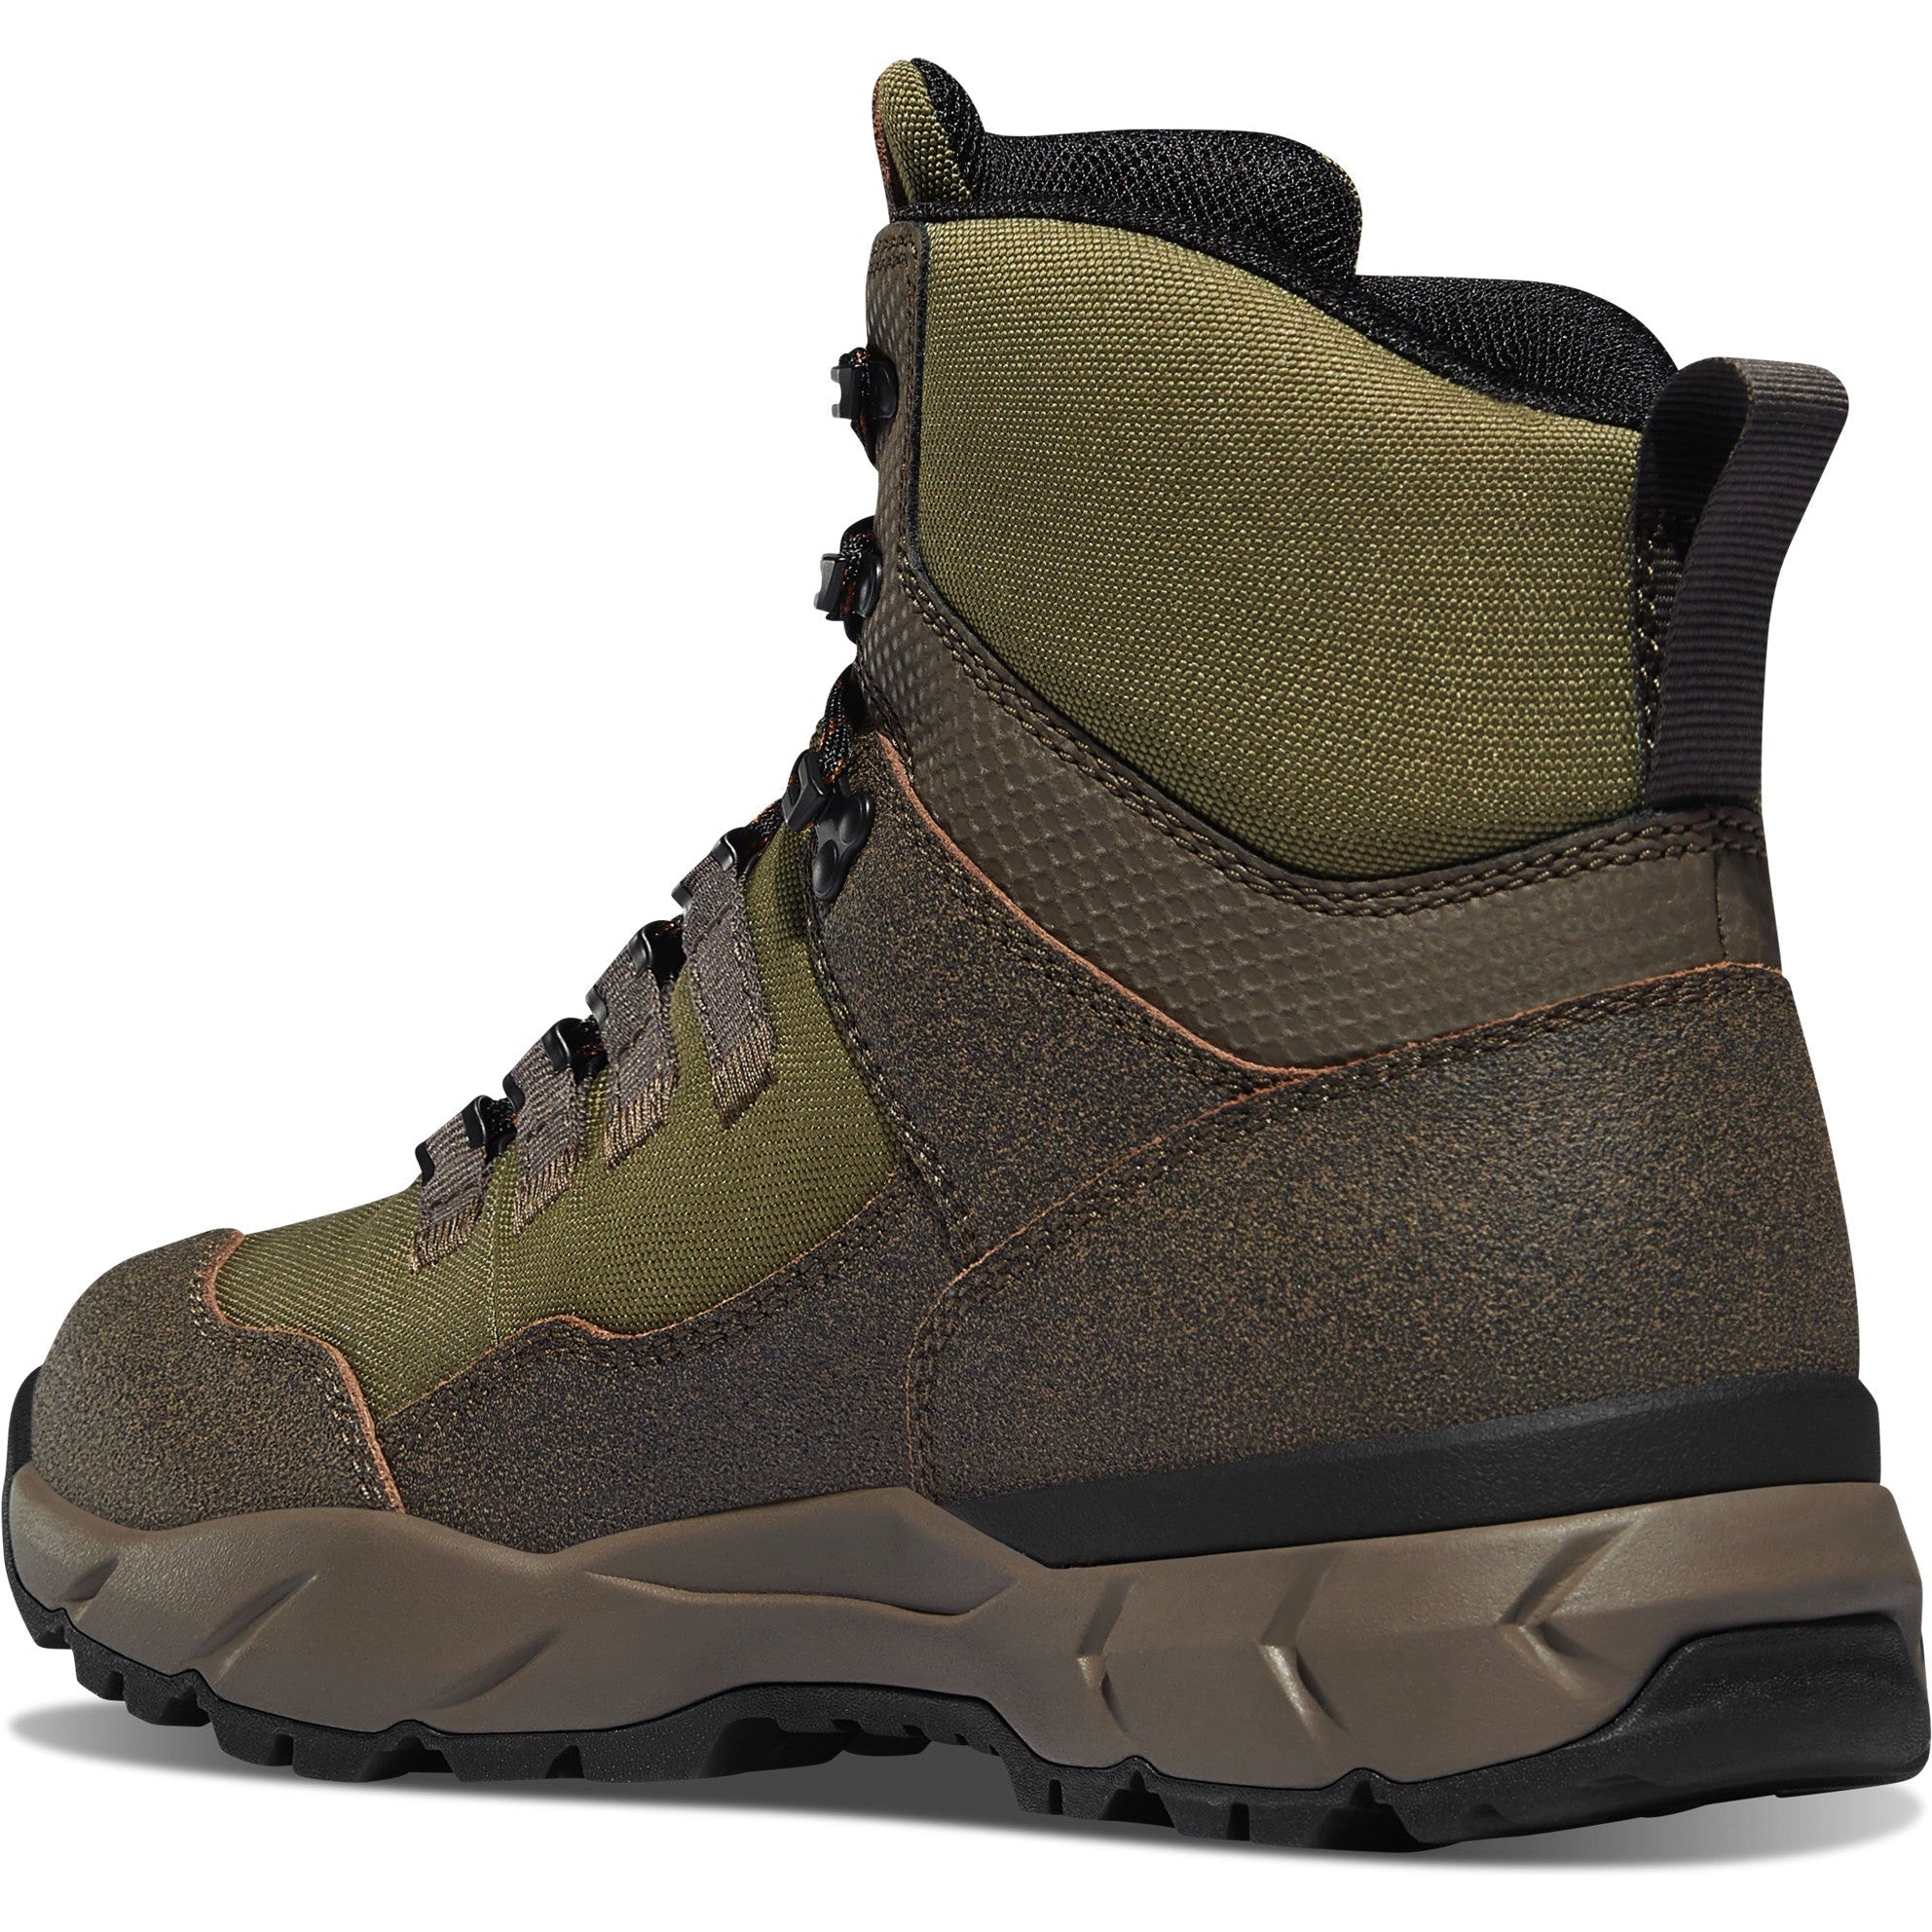 Danner Men's Vital Trail 6" WP Hiking Boot - Brown/Olive - 65301  - Overlook Boots